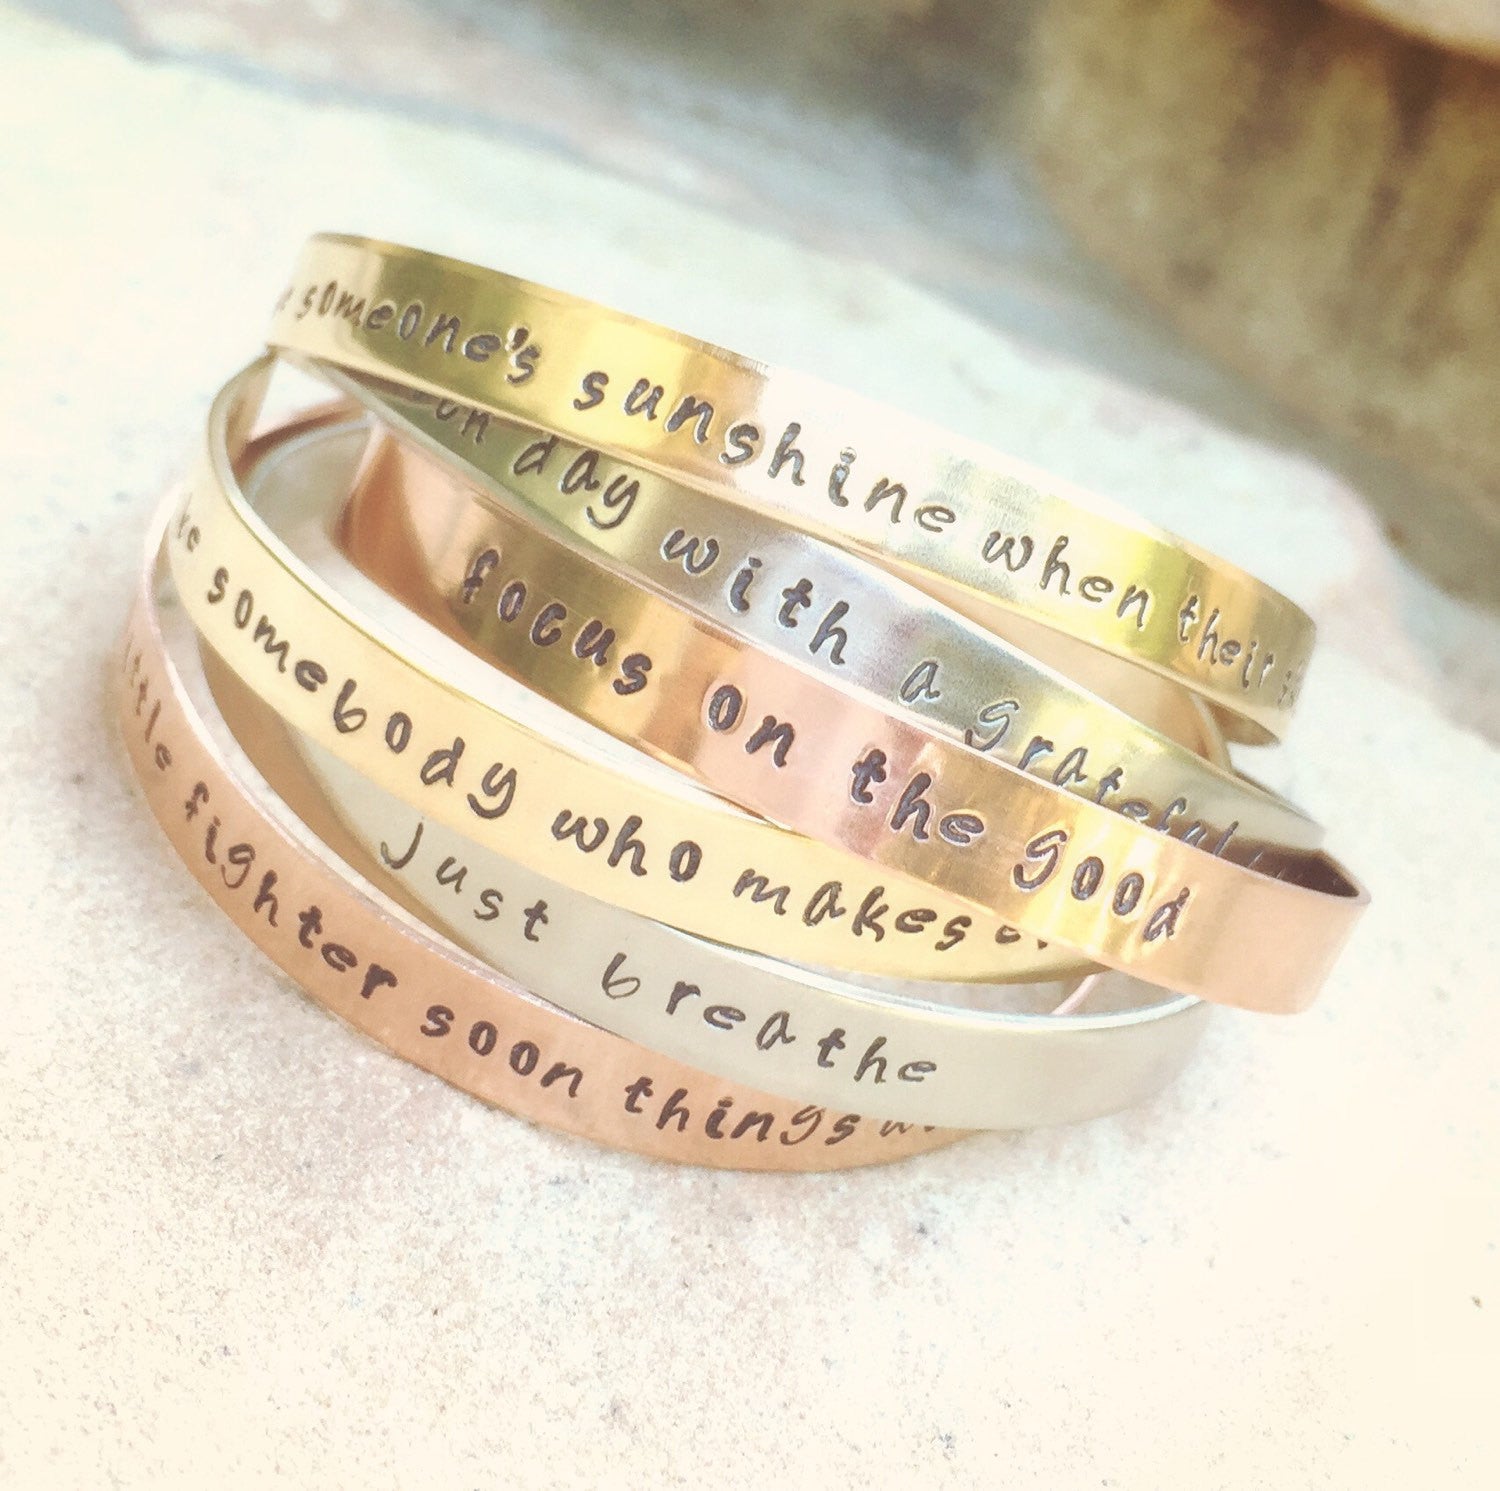 Personalized Cuffs, Positve Quote Cuffs, Mothers Day Bracelet, Hand Stamped Cuffs, Stacking Cuff Bracelets, Inspirational Cuff Bracelets - Natashaaloha, jewelry, bracelets, necklace, keychains, fishing lures, gifts for men, charms, personalized, 